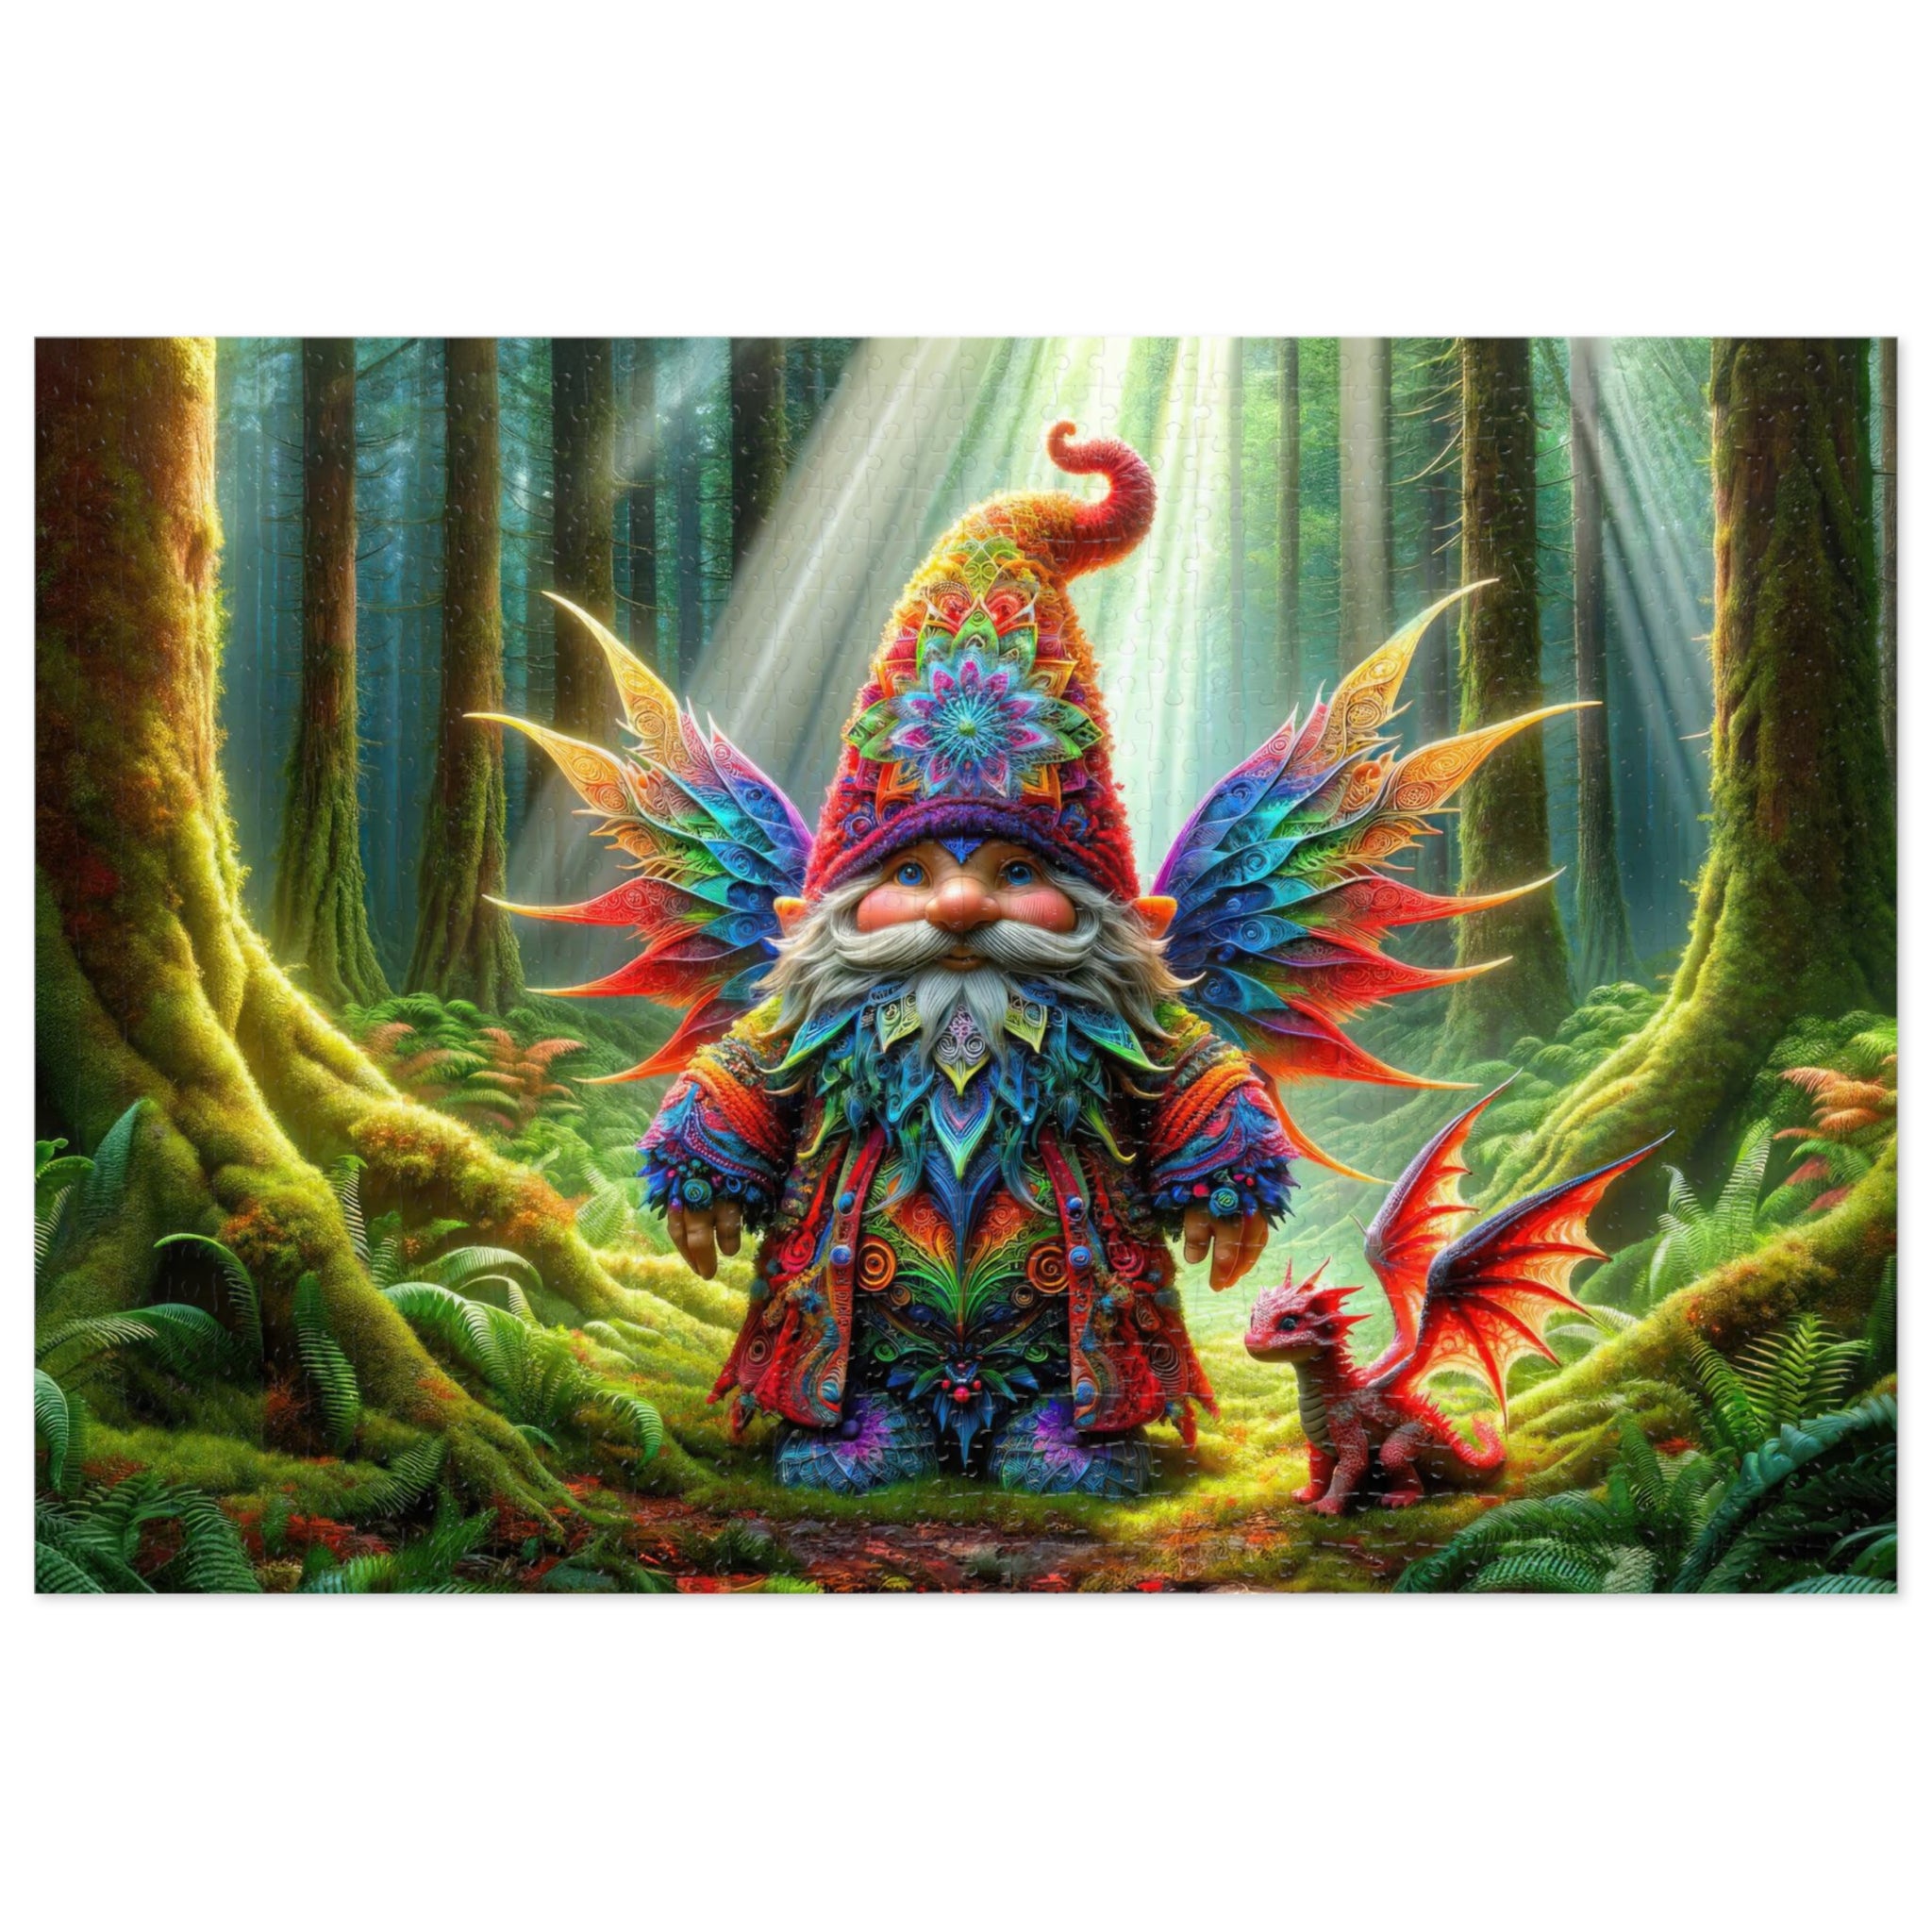 The Guardian of Whimsy Wood Jigsaw Puzzle